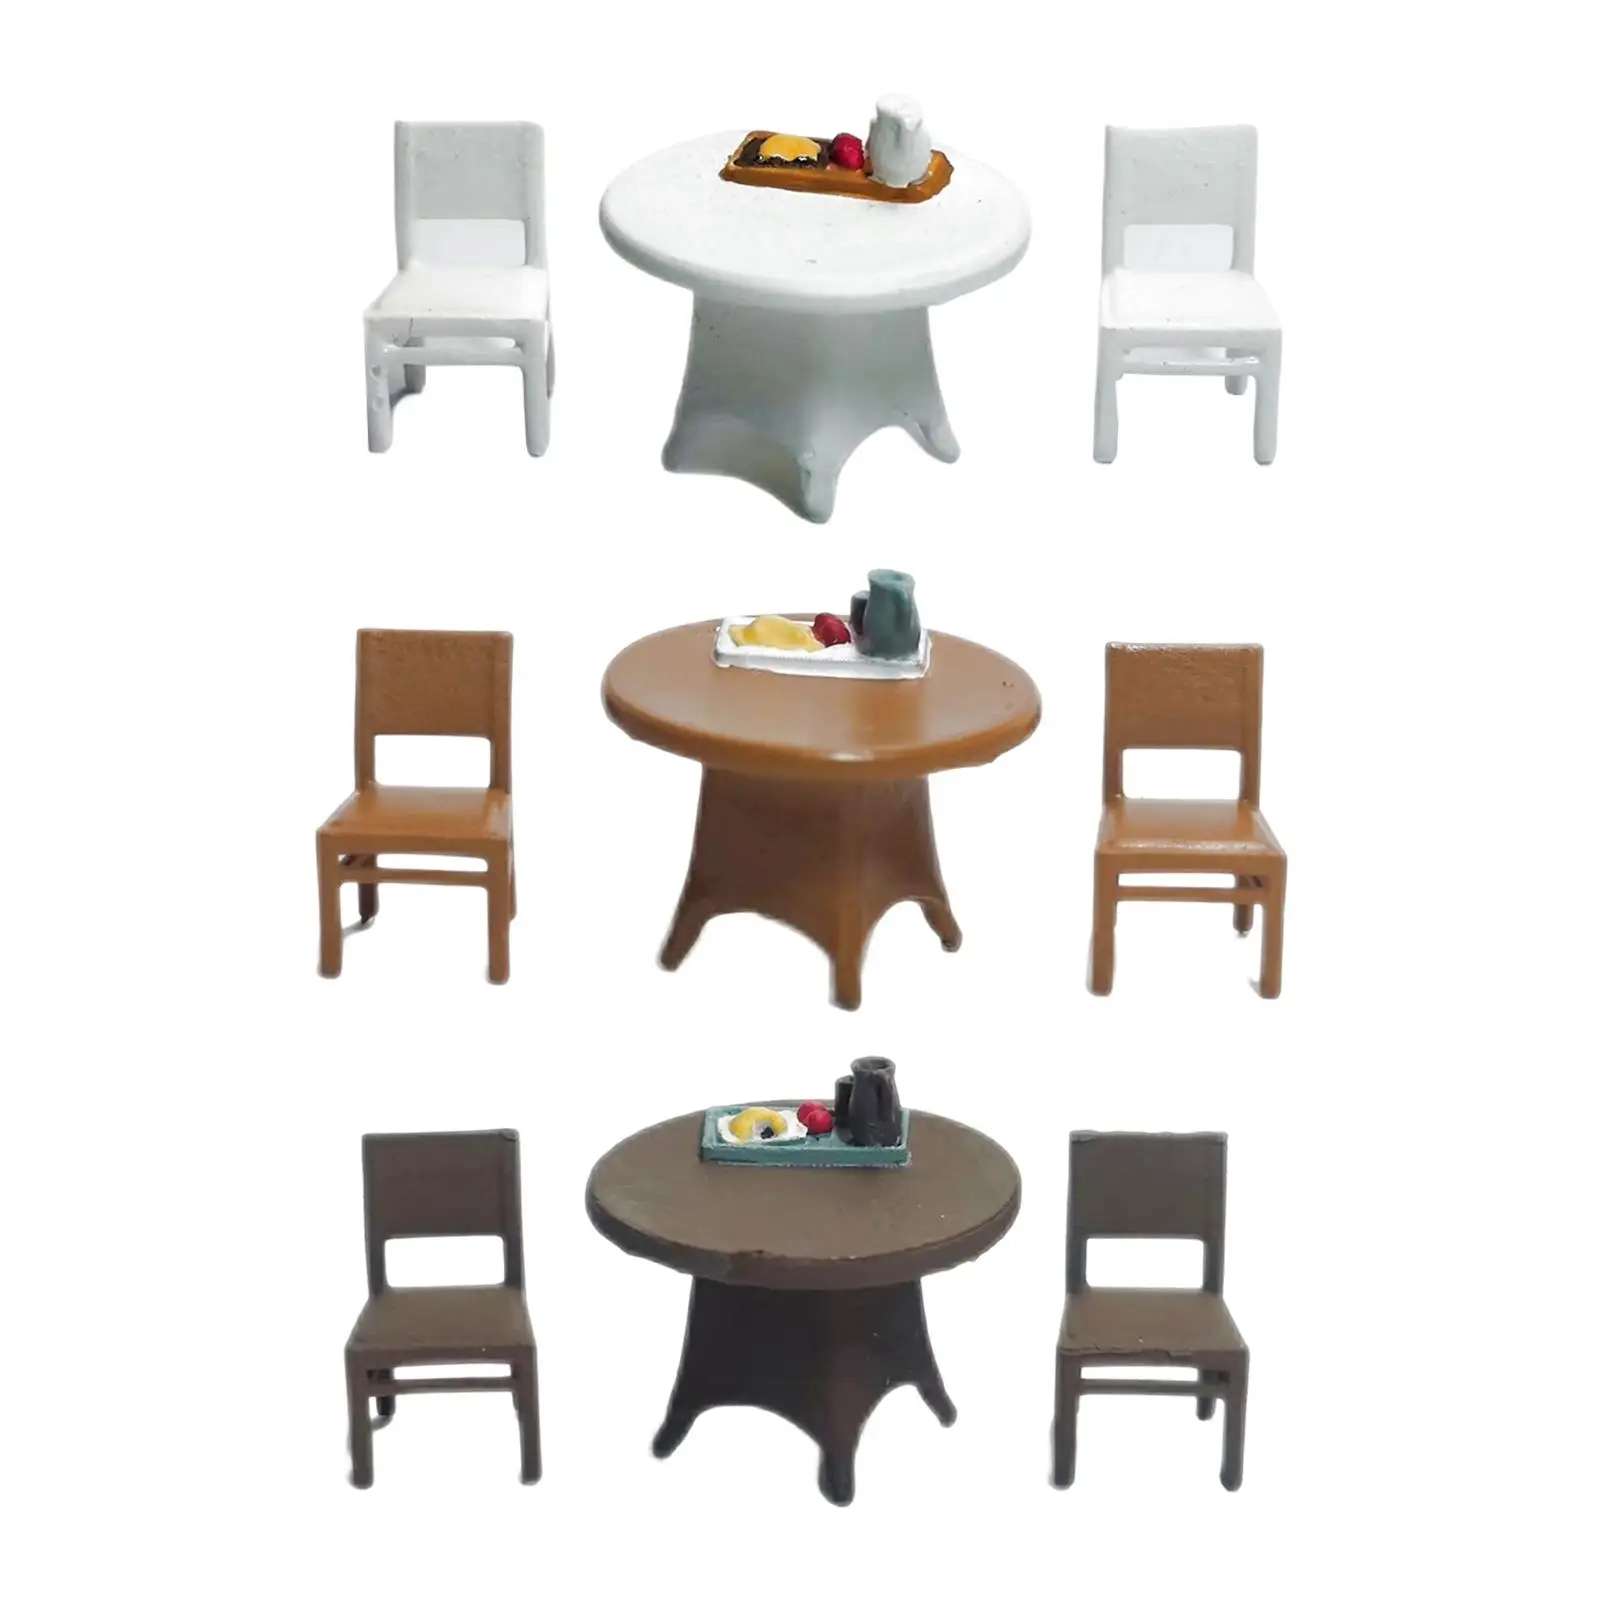 3Pcs Hand Painted 1/64 Table and Chair Model with Food Tray Miniature Scenes Decor